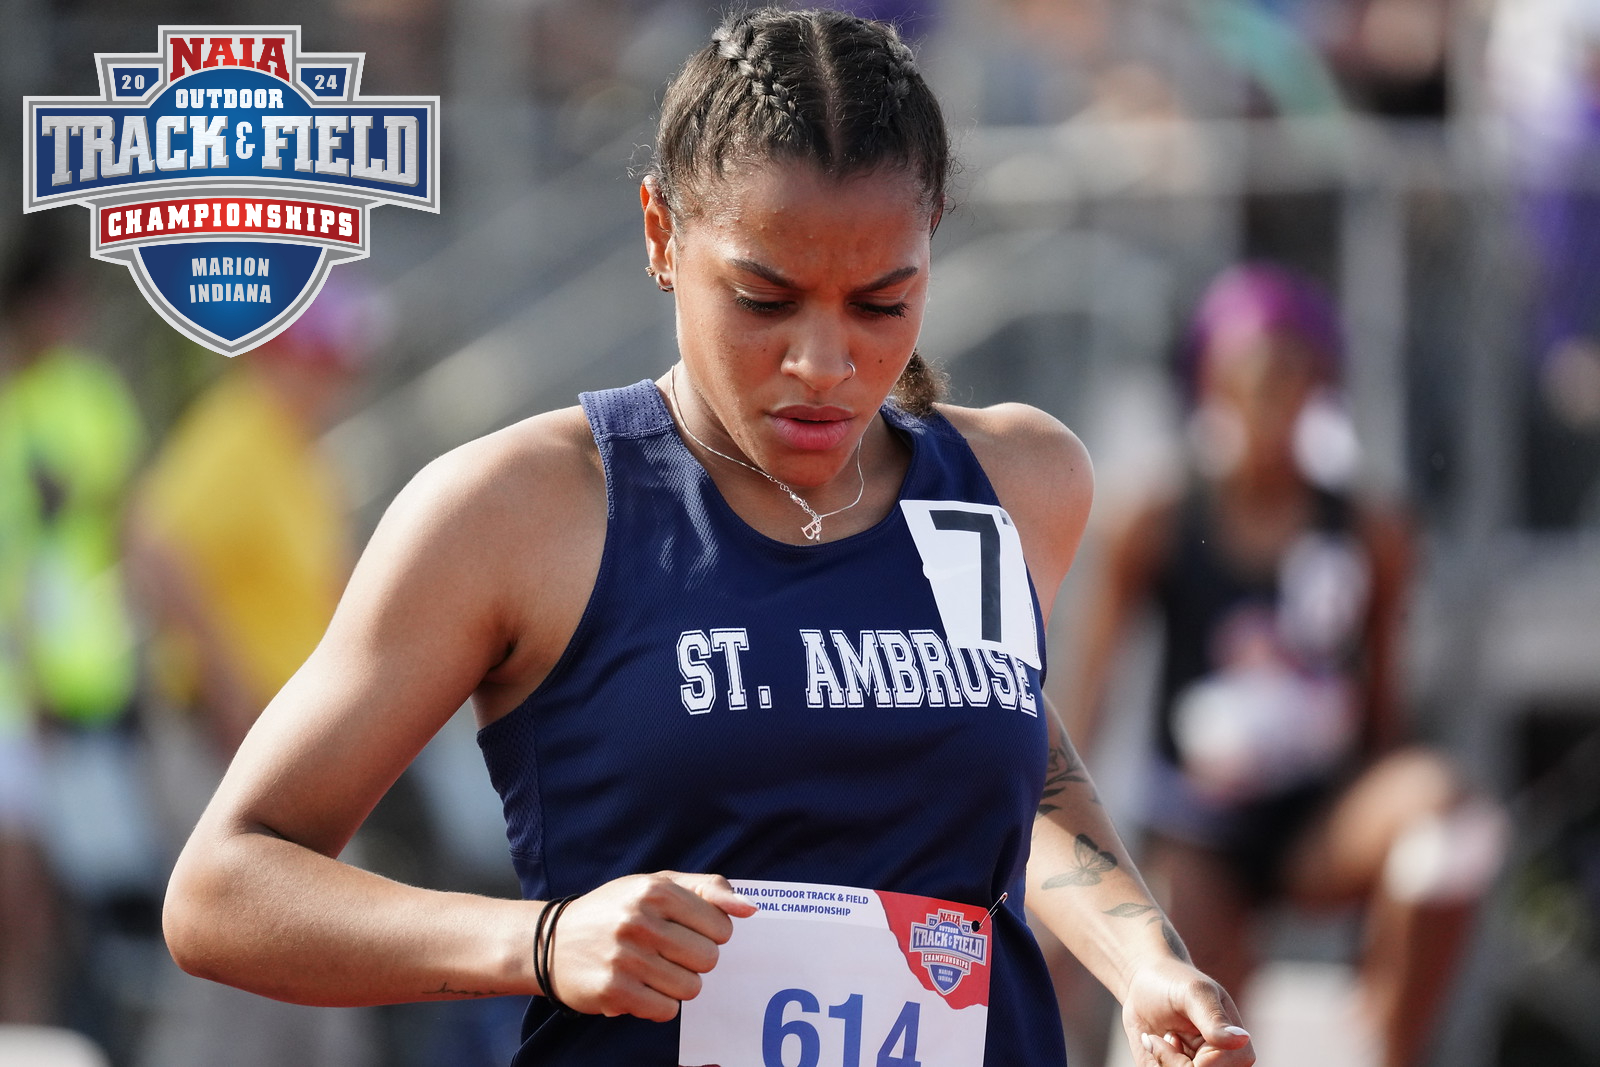 Updates from the NAIA Outdoor Track & Field Championships